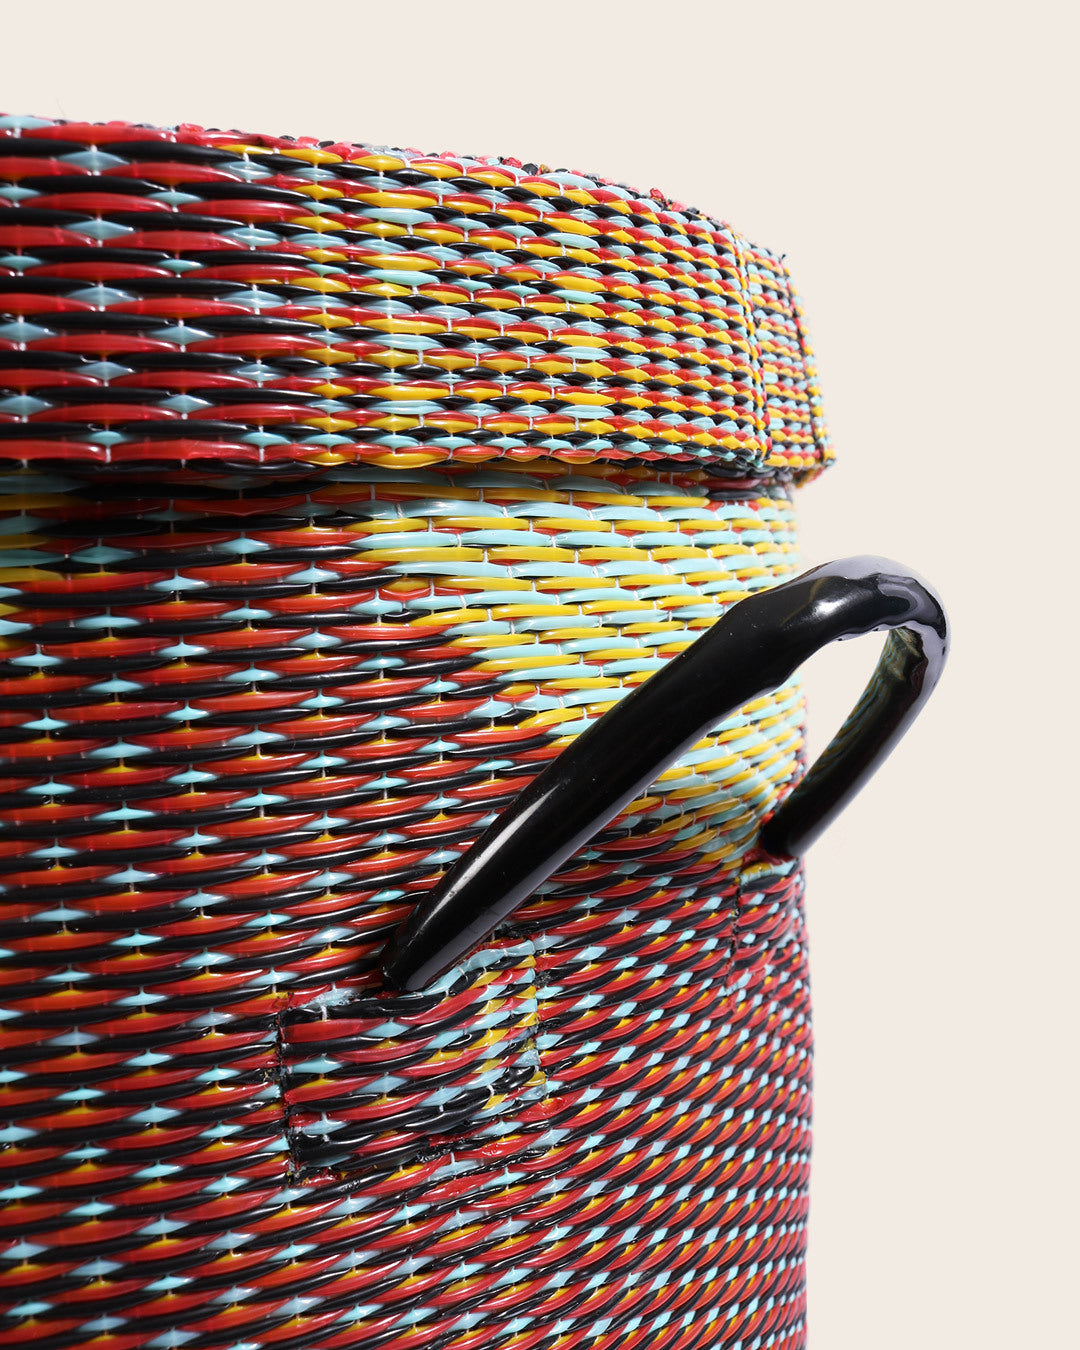 Handwoven Basket with Lid, No 15